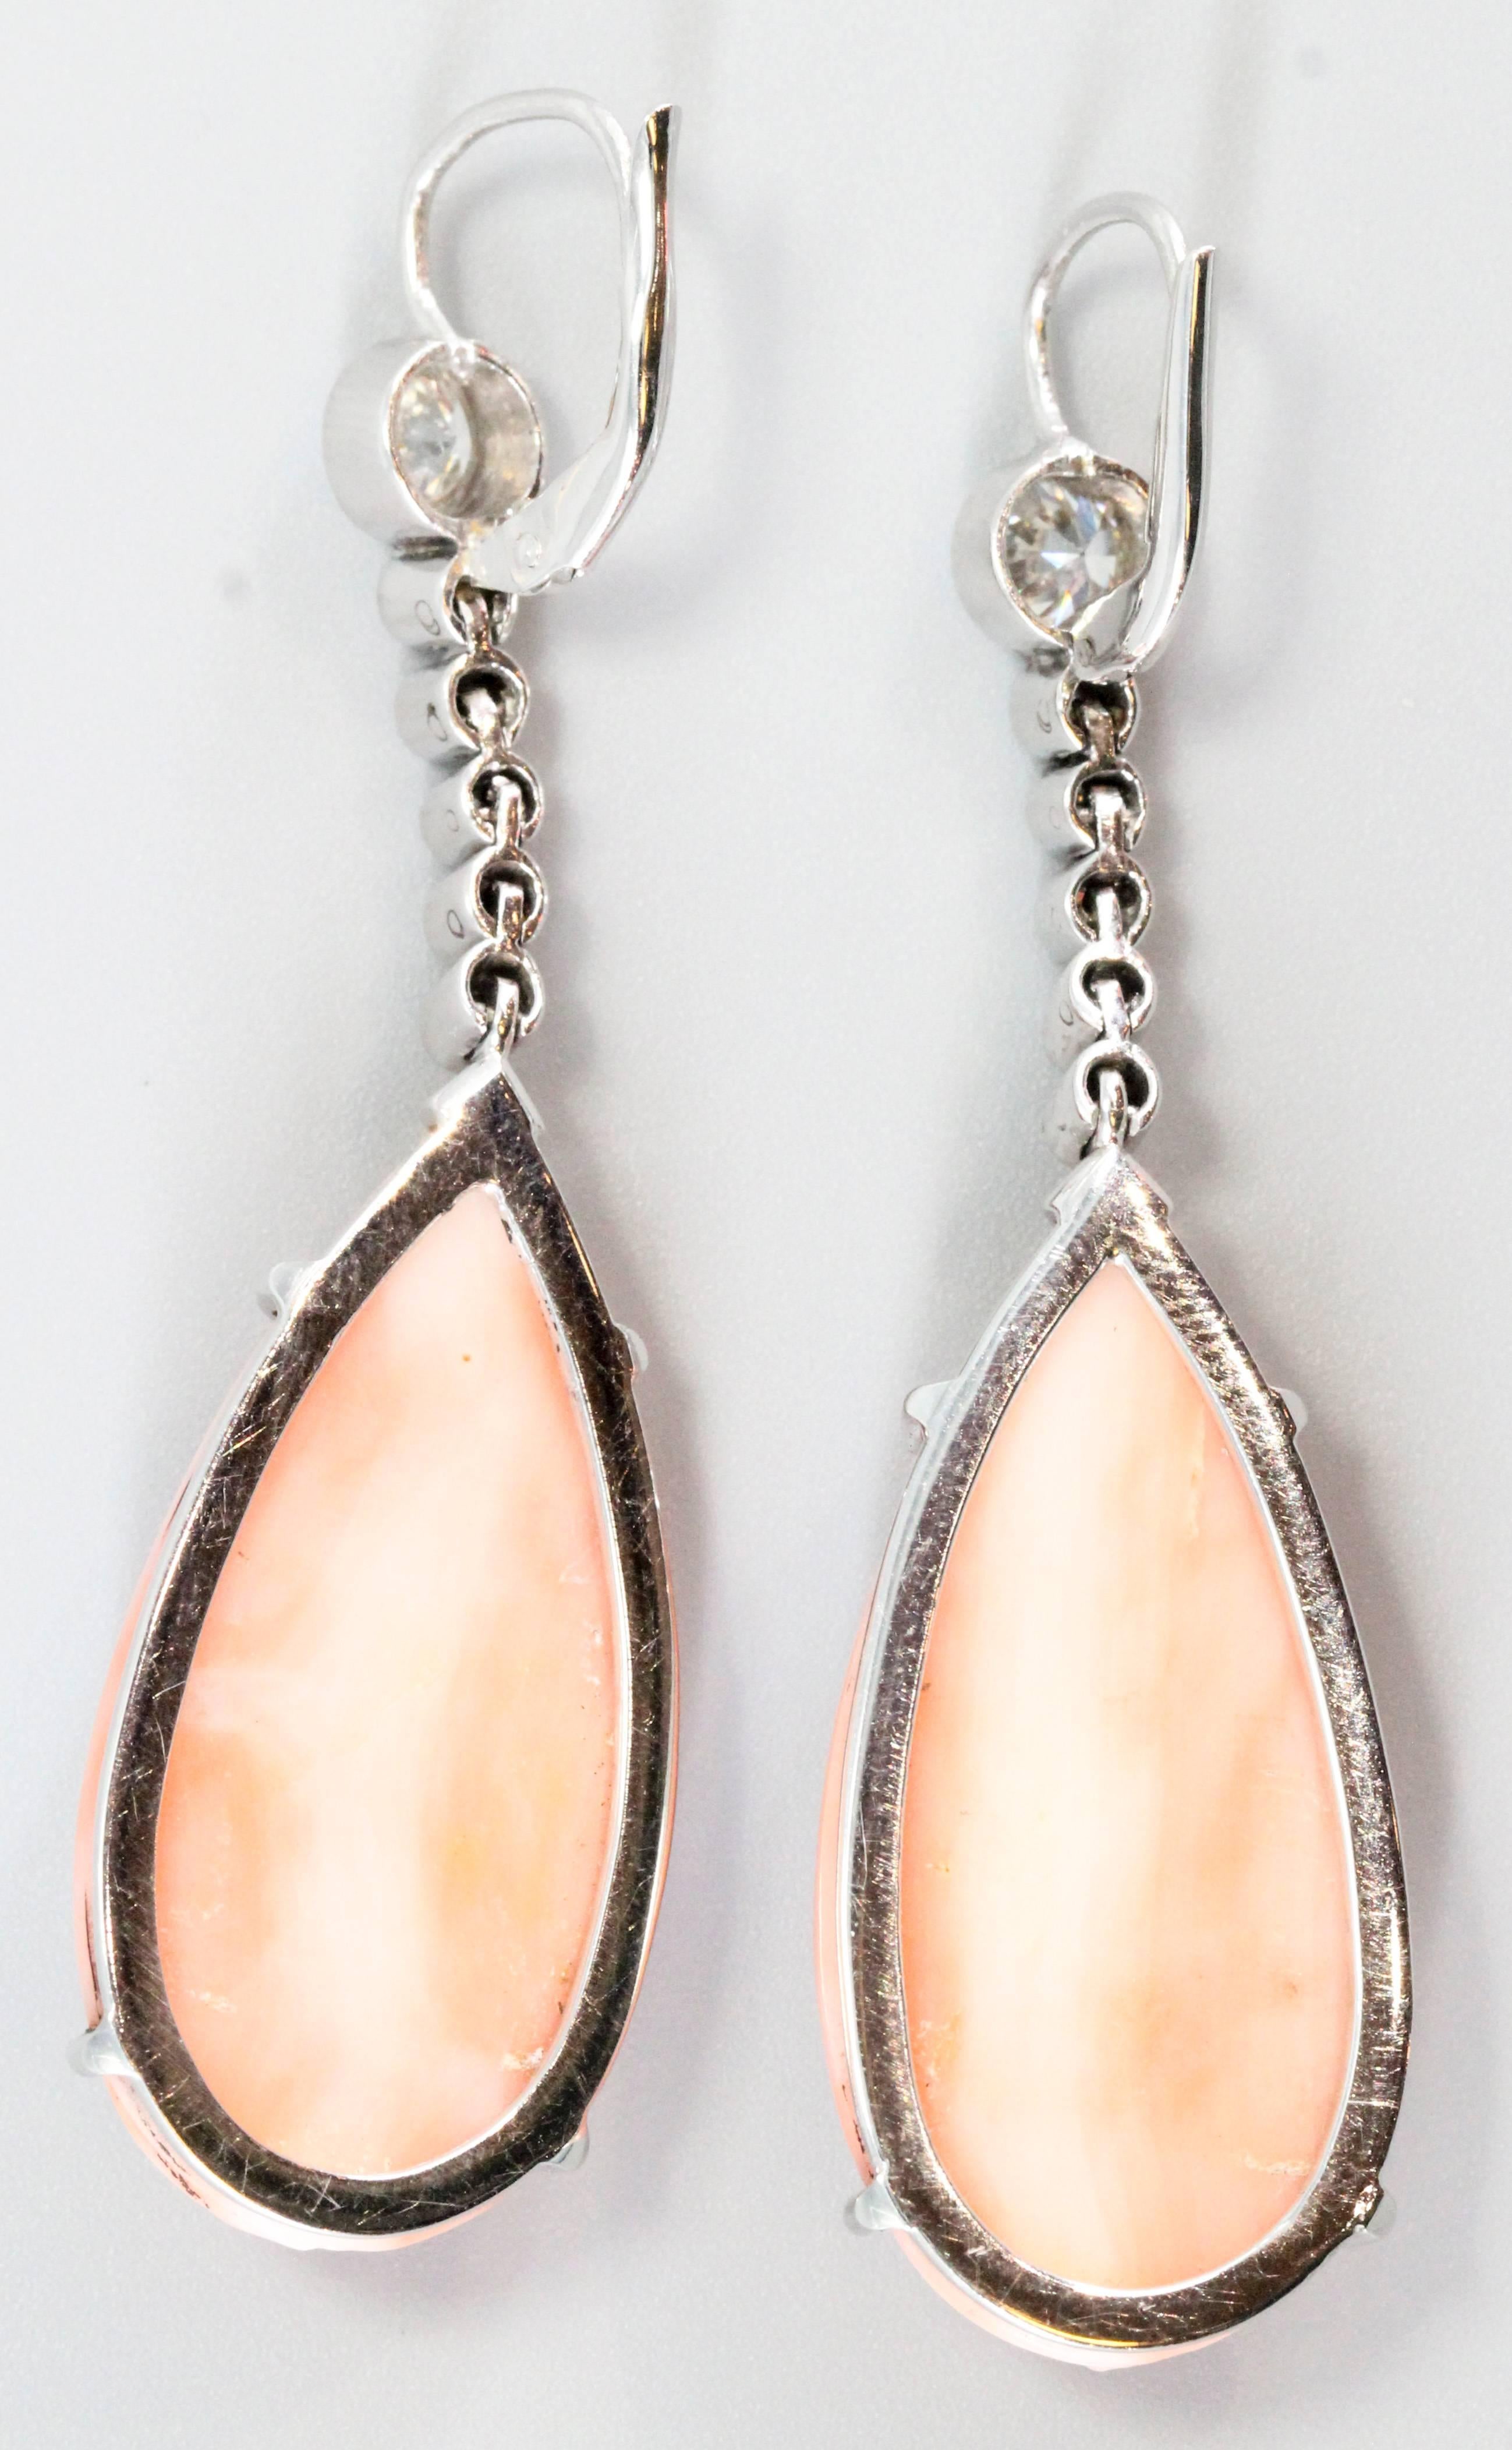 Chic diamond, angel skin coral and platinum ear pendants, circa 1950s. They feature high grade round brilliant cut diamonds, along with a platinum mounting and a beautiful pear shaped, ribbed coral piece at the bottom. Expertly crafted.

